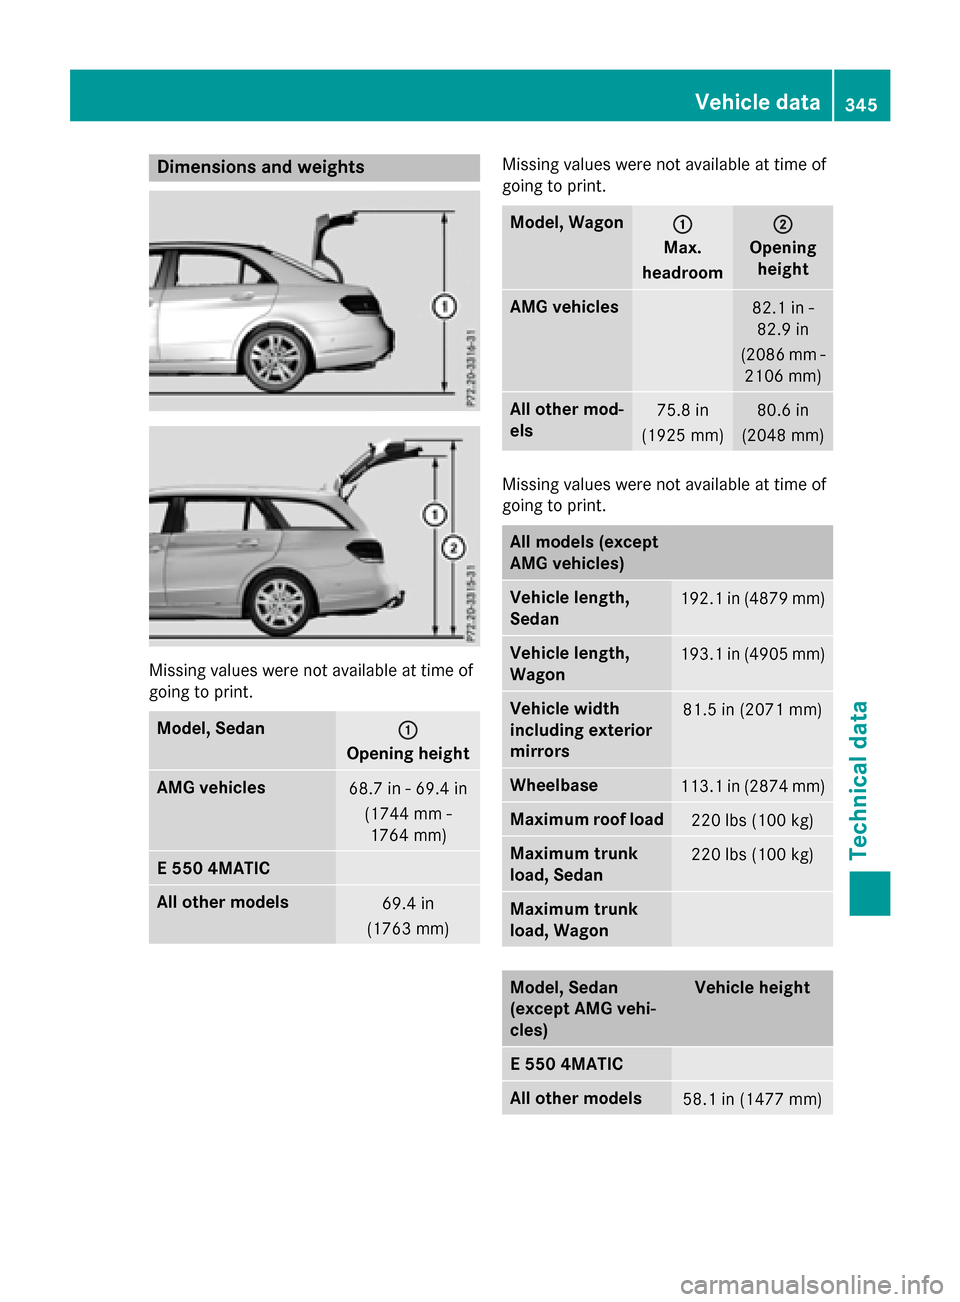 MERCEDES-BENZ E-Class SEDAN 2016 W213 Owners Manual Dimensions andweights
Missin gvalues wer eno tavailable at time of
going to print .
Model, Sedan:
Openingheight
AMG vehicles68.7 in -69.4 in
(1744 mm -
1764 mm)
E 550 4MATIC
All other model s69.4 in
(